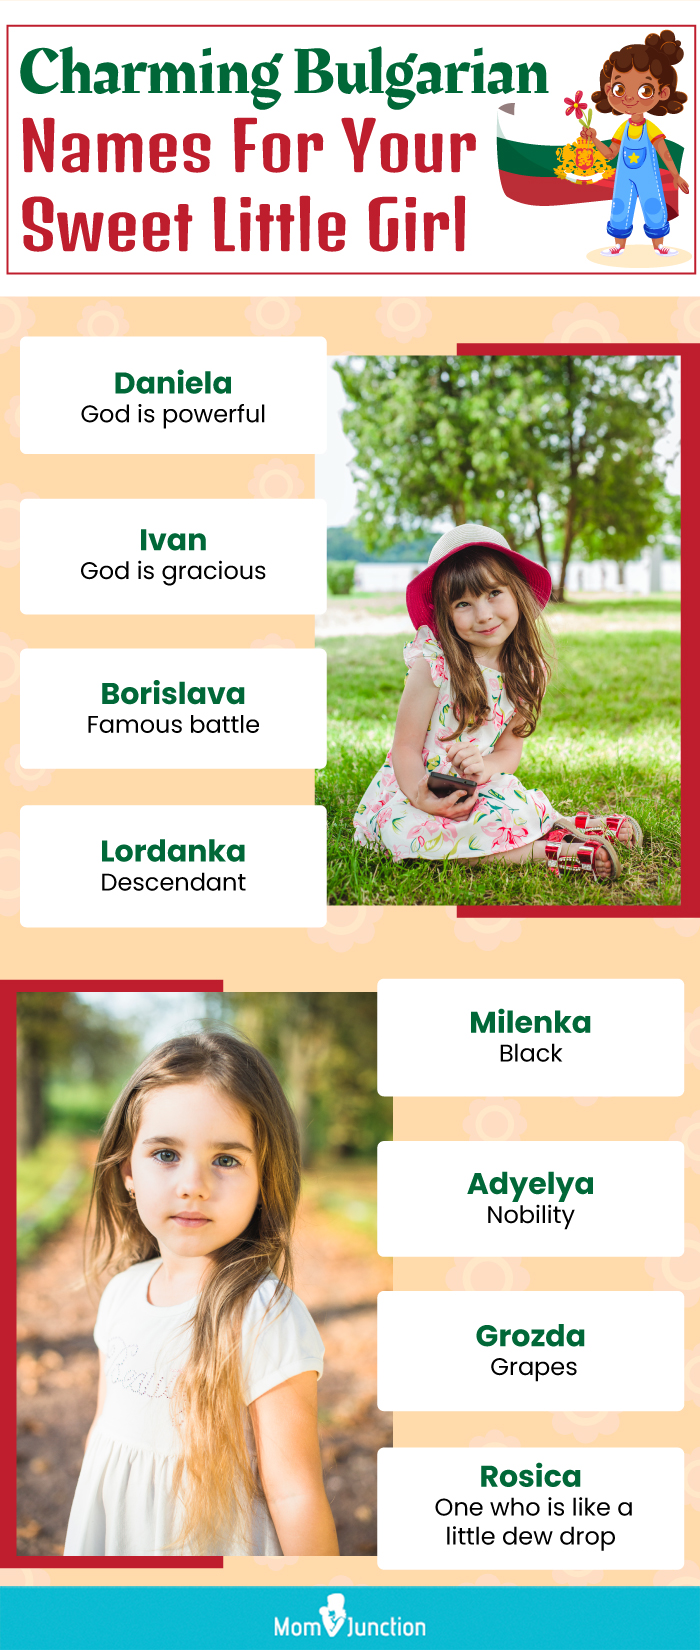 charming bulgarian names for your sweet little girl (infographic)